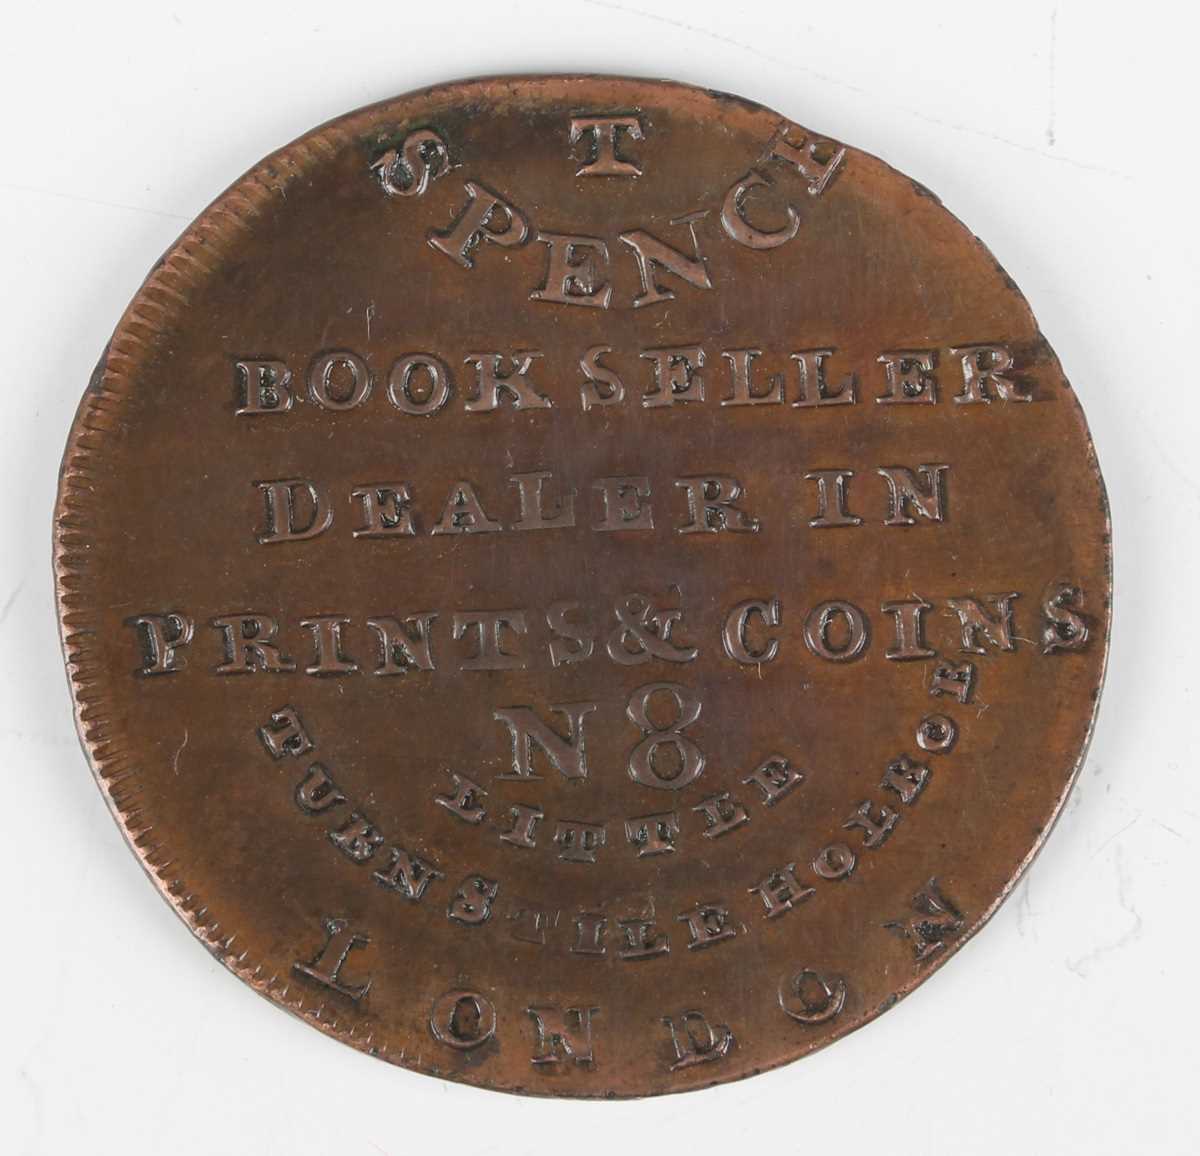 A Thomas Spence halfpenny mule token, detailed 'A Westminster Scholar' (DH 704), and an - Image 5 of 5